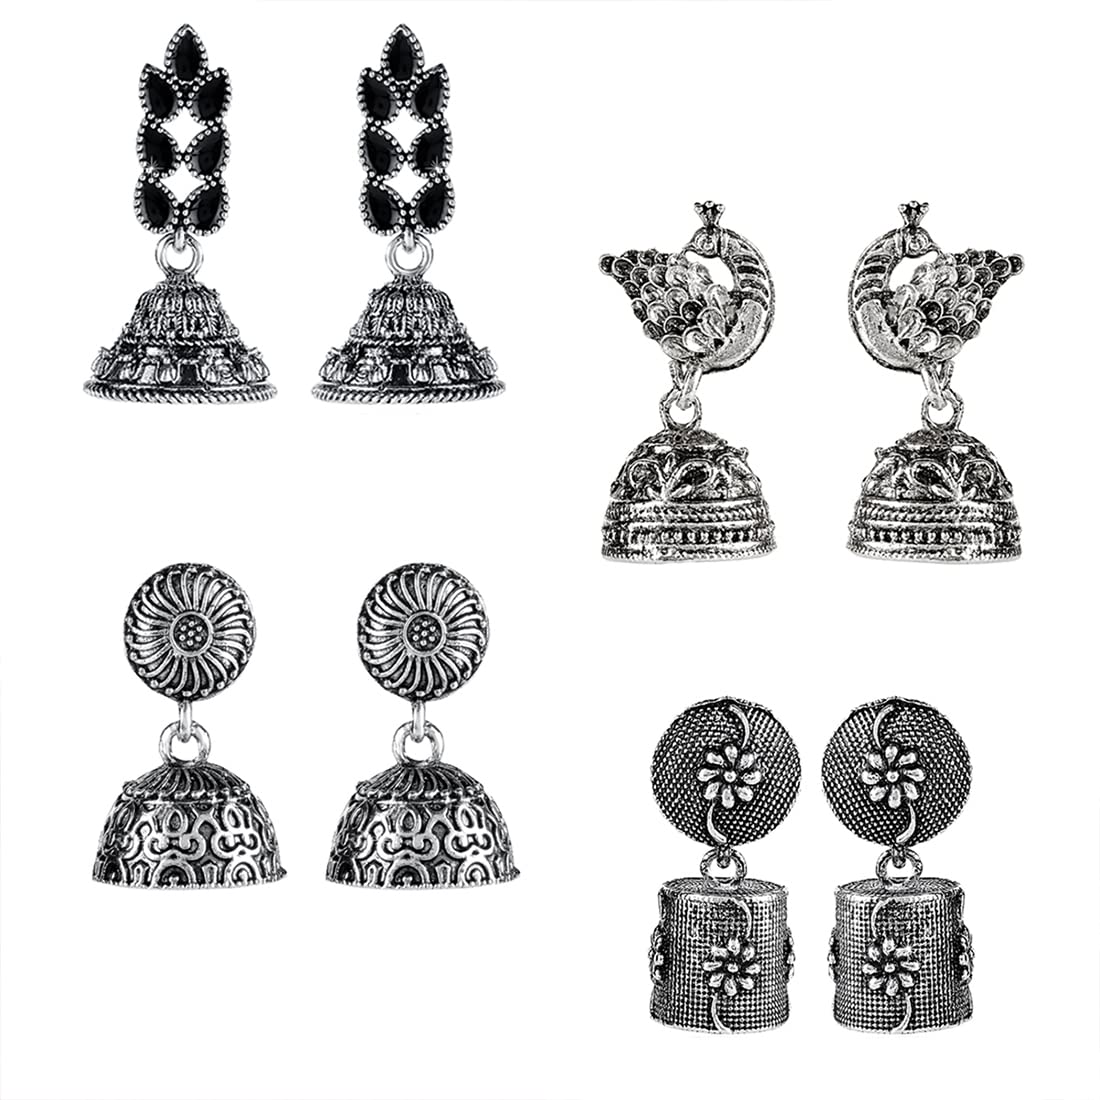 Kairangi Earrings for Women and Girls 4 pcs of Combo Silver Oxidised Jhumka Earring | Floral and Peacock Shaped Jhumki Earrings Combo| Birthday Gift for girls & women Anniversary Gift for Wife